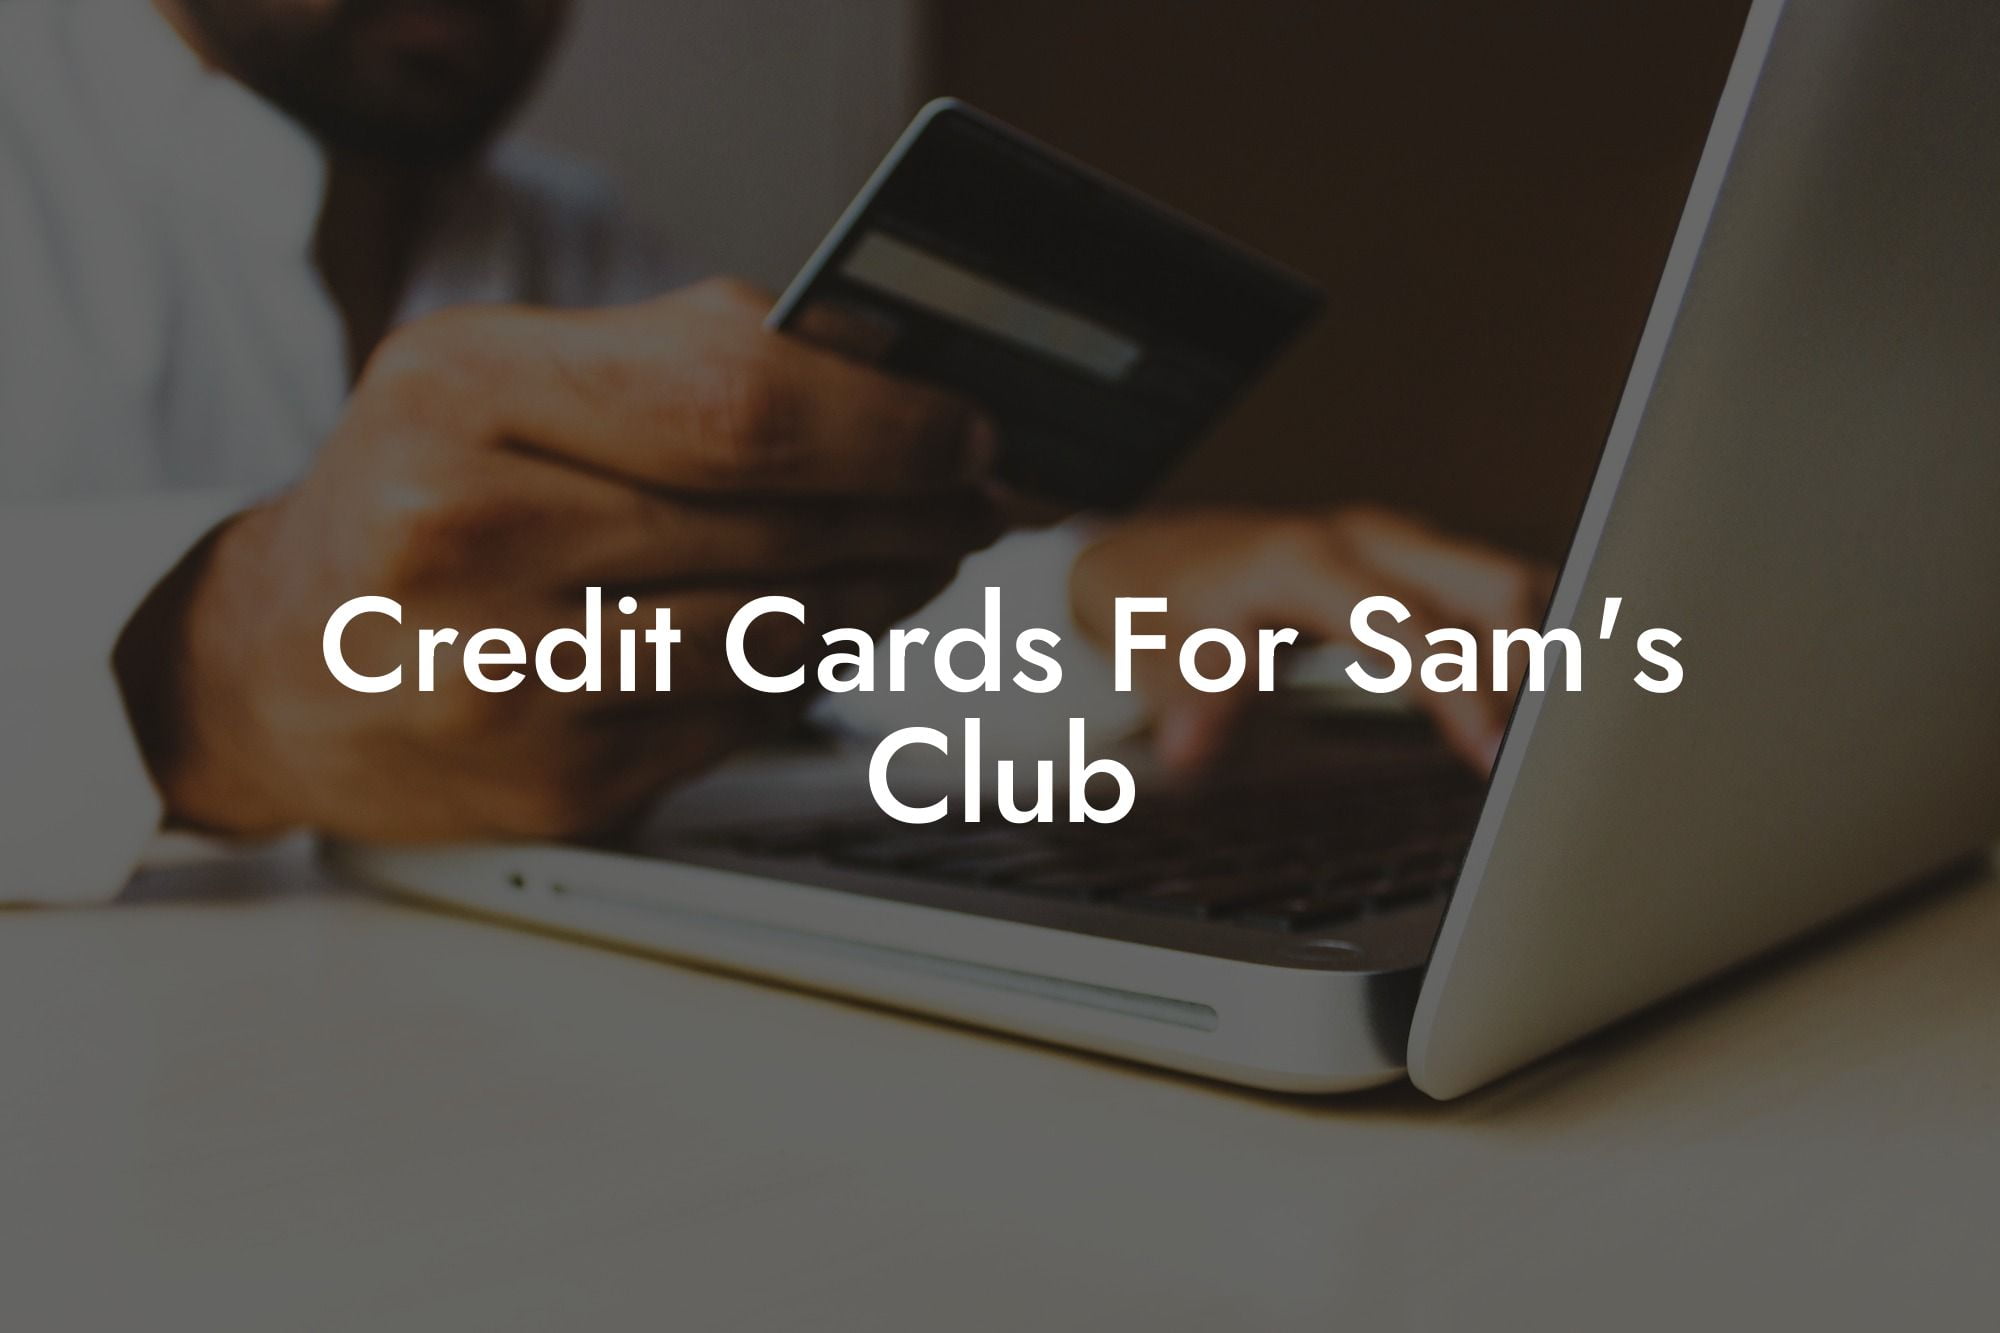 Credit Cards For Sam's Club